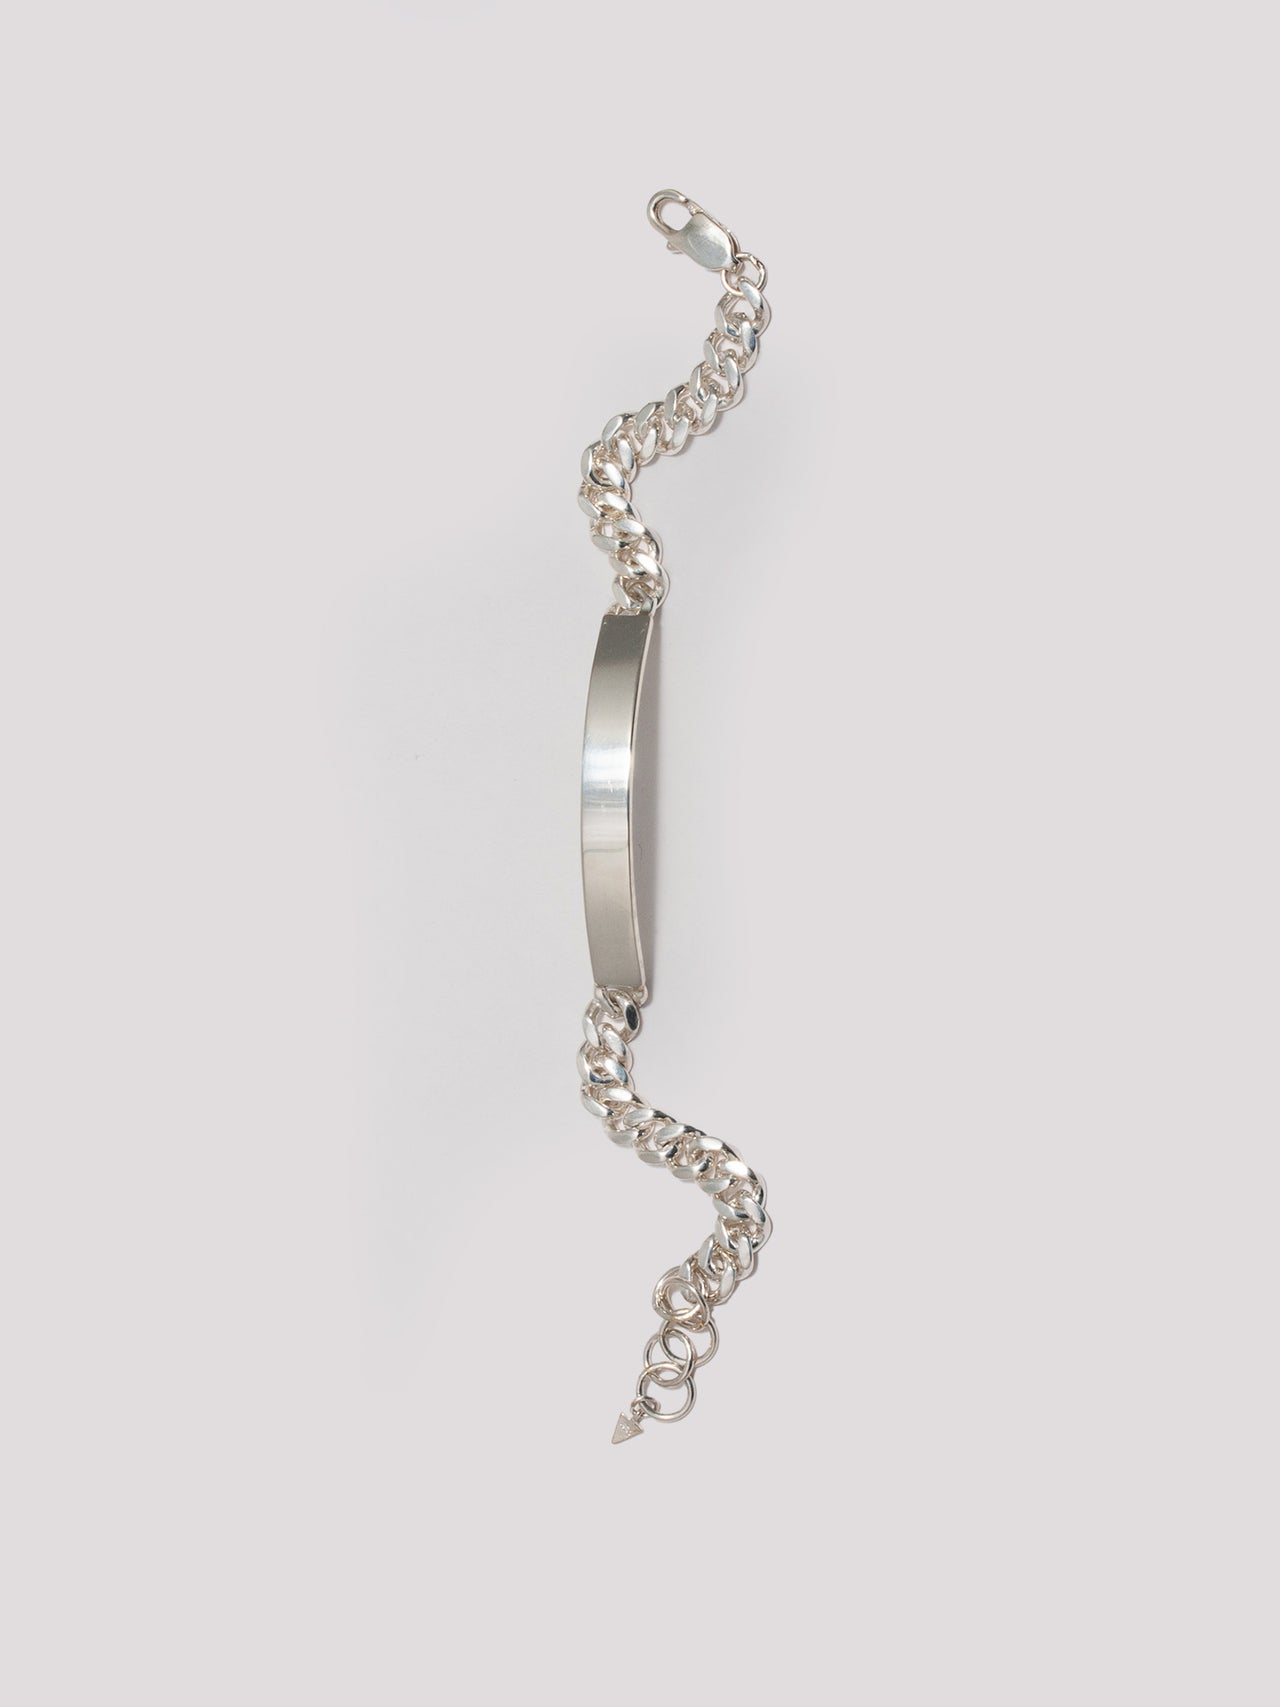 Sterling Silver Industrial ID Bracelet pictured unclasped horizontally laid out on light grey background.